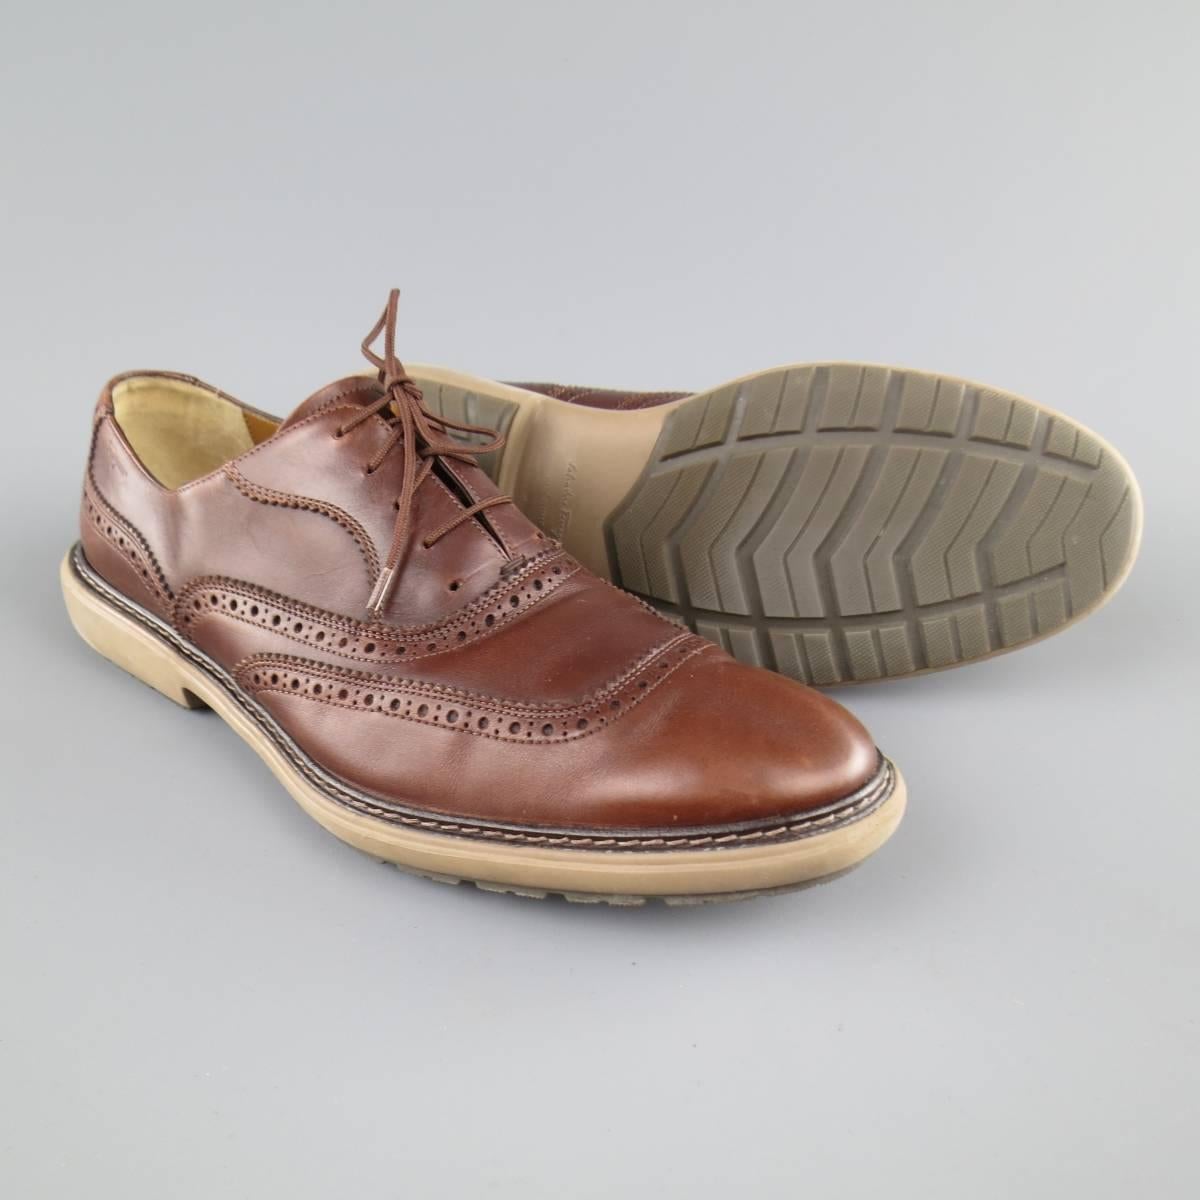 SALVATORE FERRAGAMO lace ups in a tan brown leather featuring perforated brogue details throughout and a tan rubber sole. Wear throughout leather. Made in Italy.
 
Good Pre-Owned Condition.
Marked:11
 
Outsole: 13 x 4.75 in.